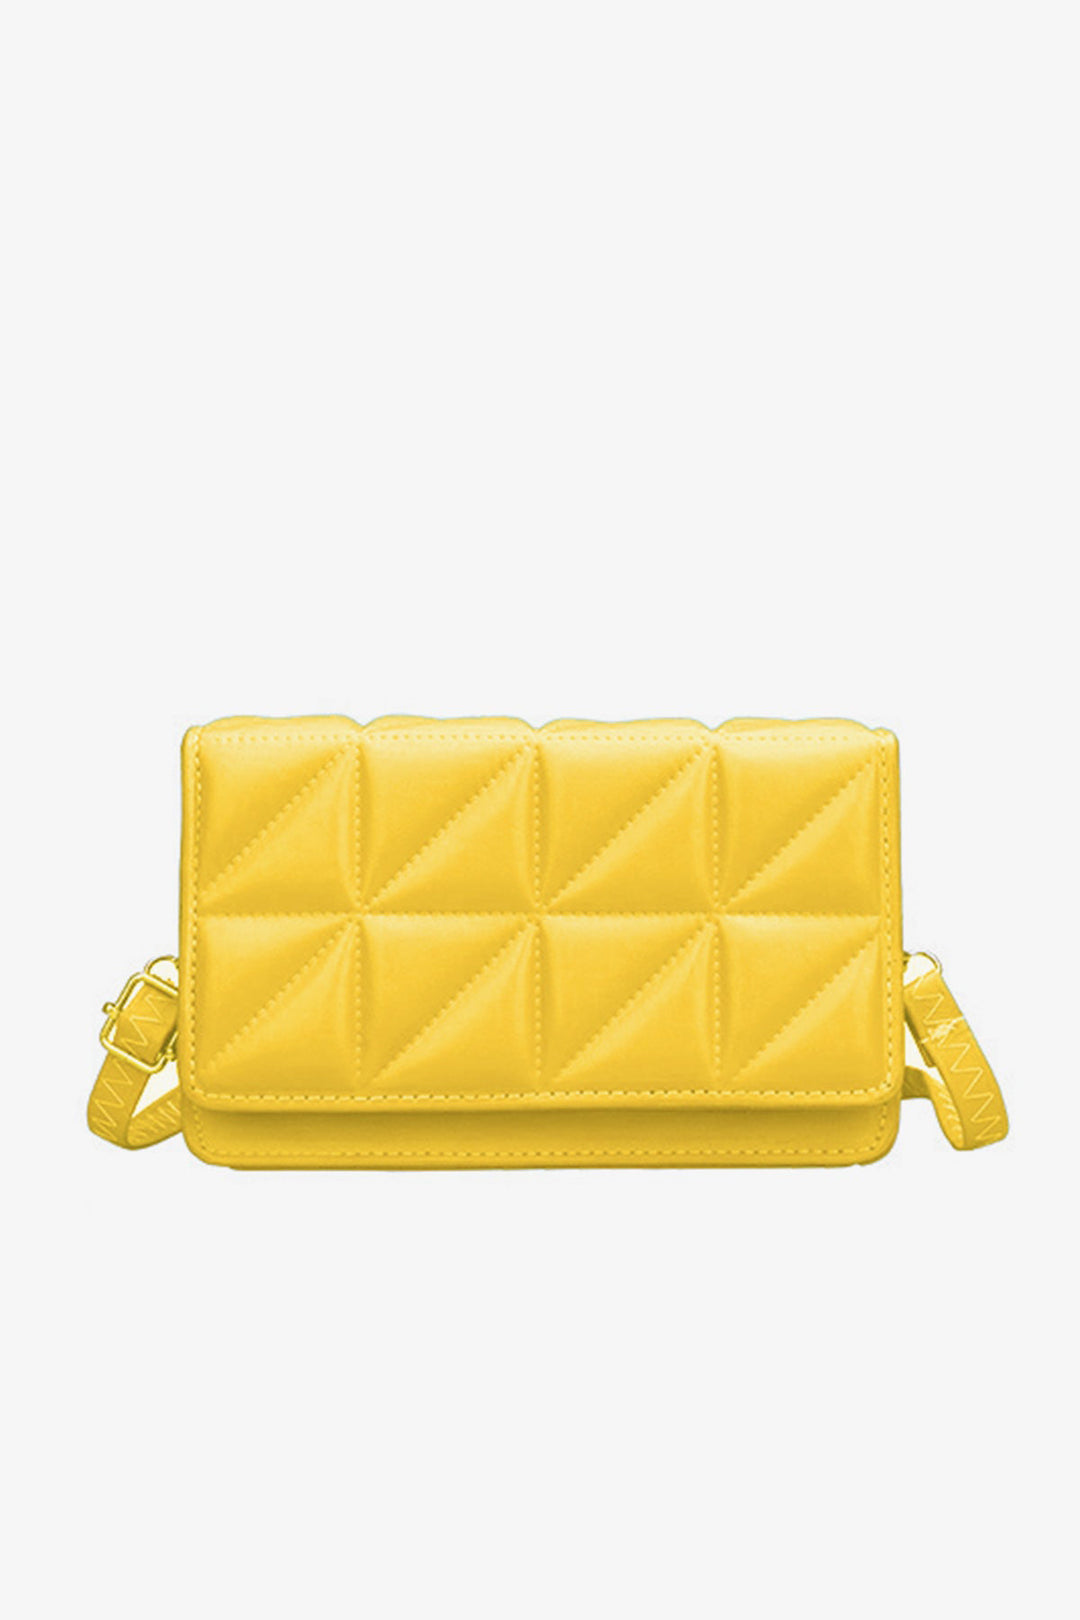 Yellow Sling Leather Bag - A23 - WHB0057